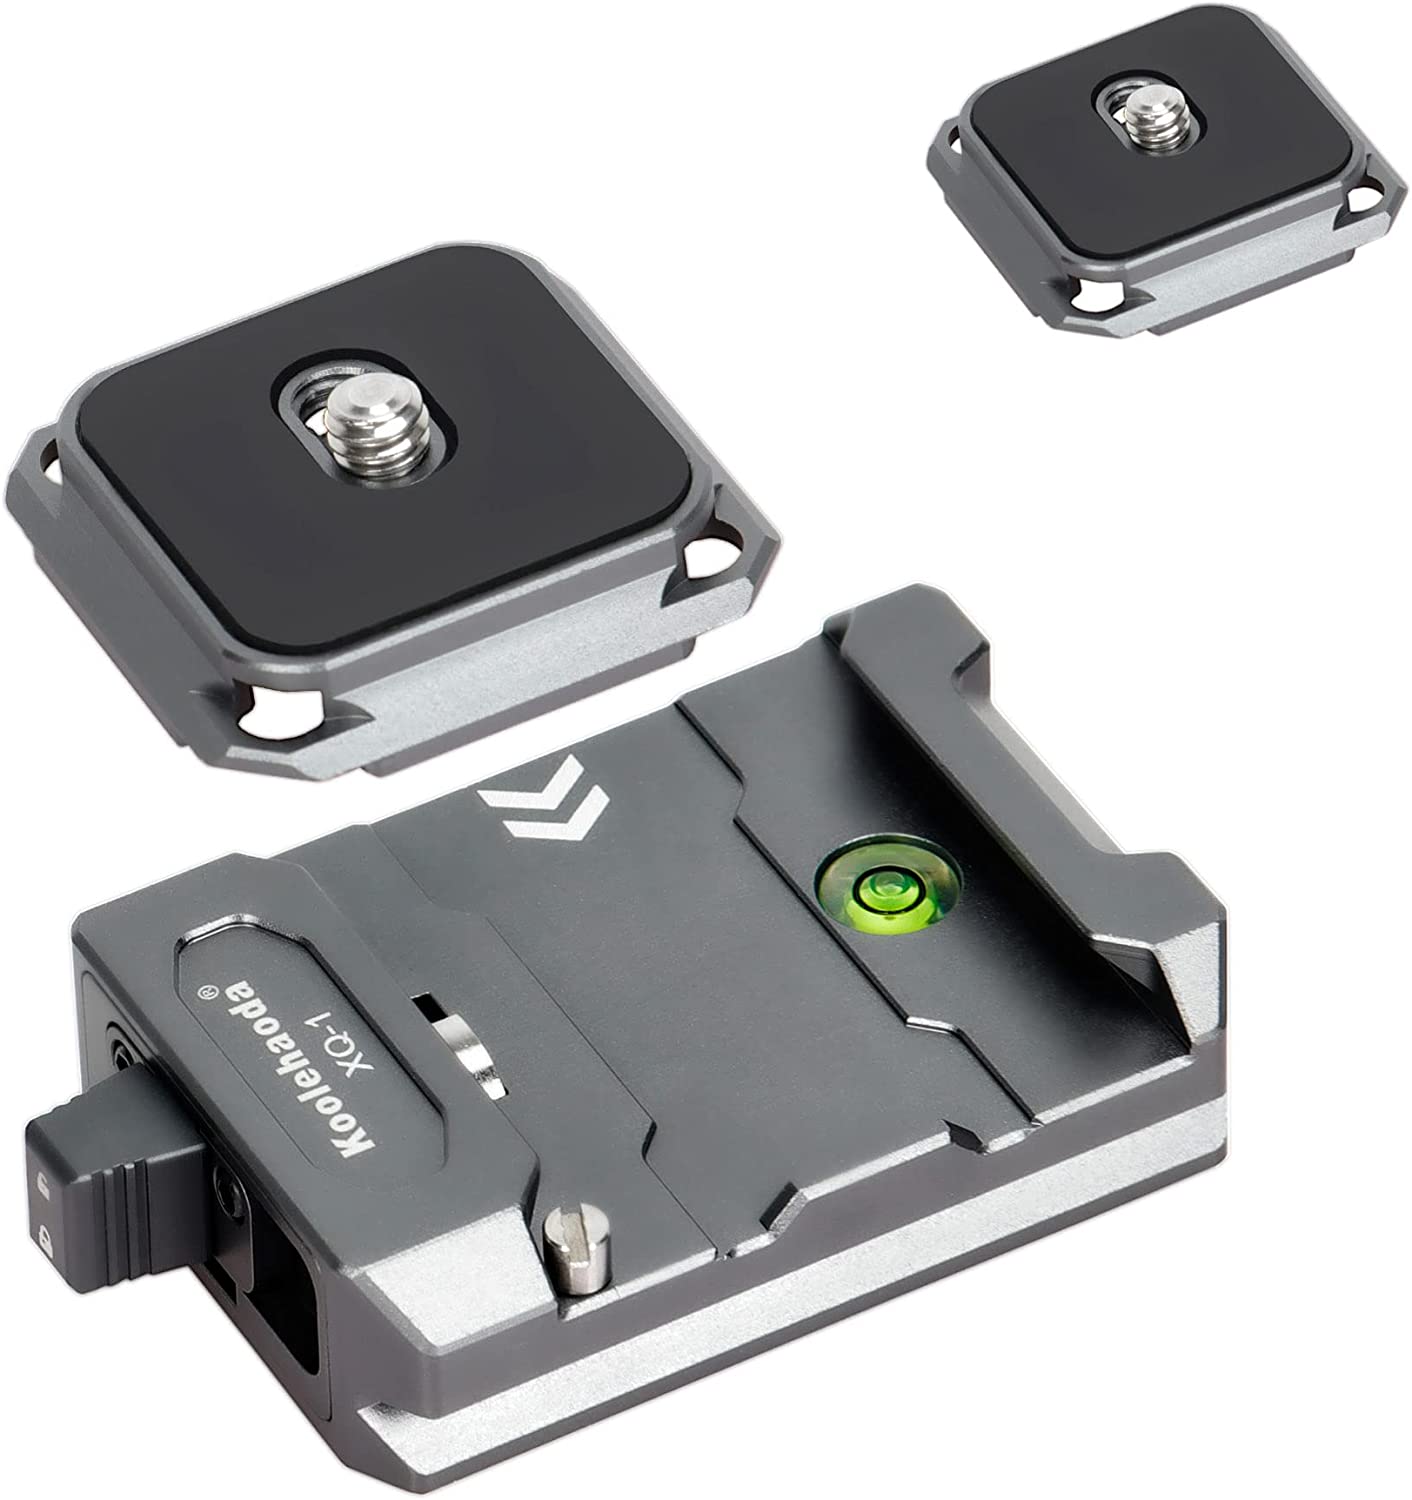 XQ-1 Quick Release Plate Adapter with Arcac-Swiss Interface and Two 1/4" Screw Quick Release Plate Fits for Tripods Monopods DSLR Stabilizer Slider